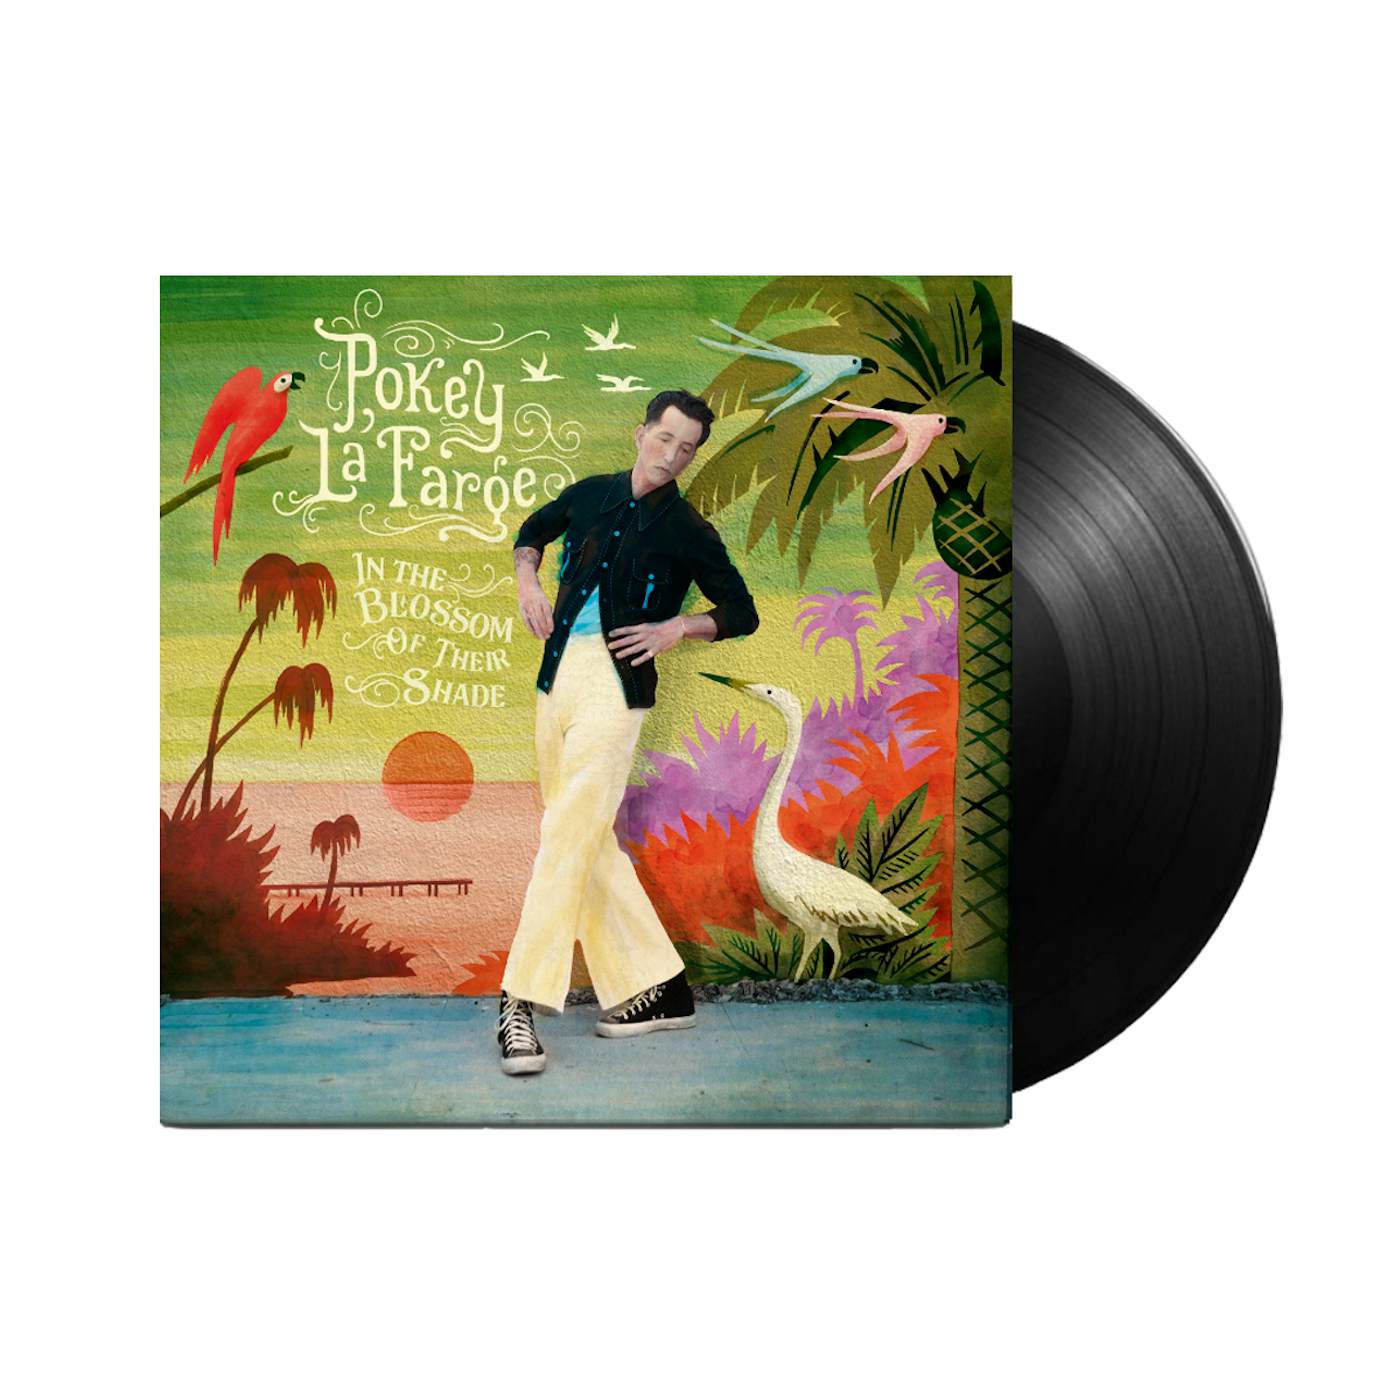 Pokey LaFarge "In the Blossom of Their Shade" Vinyl